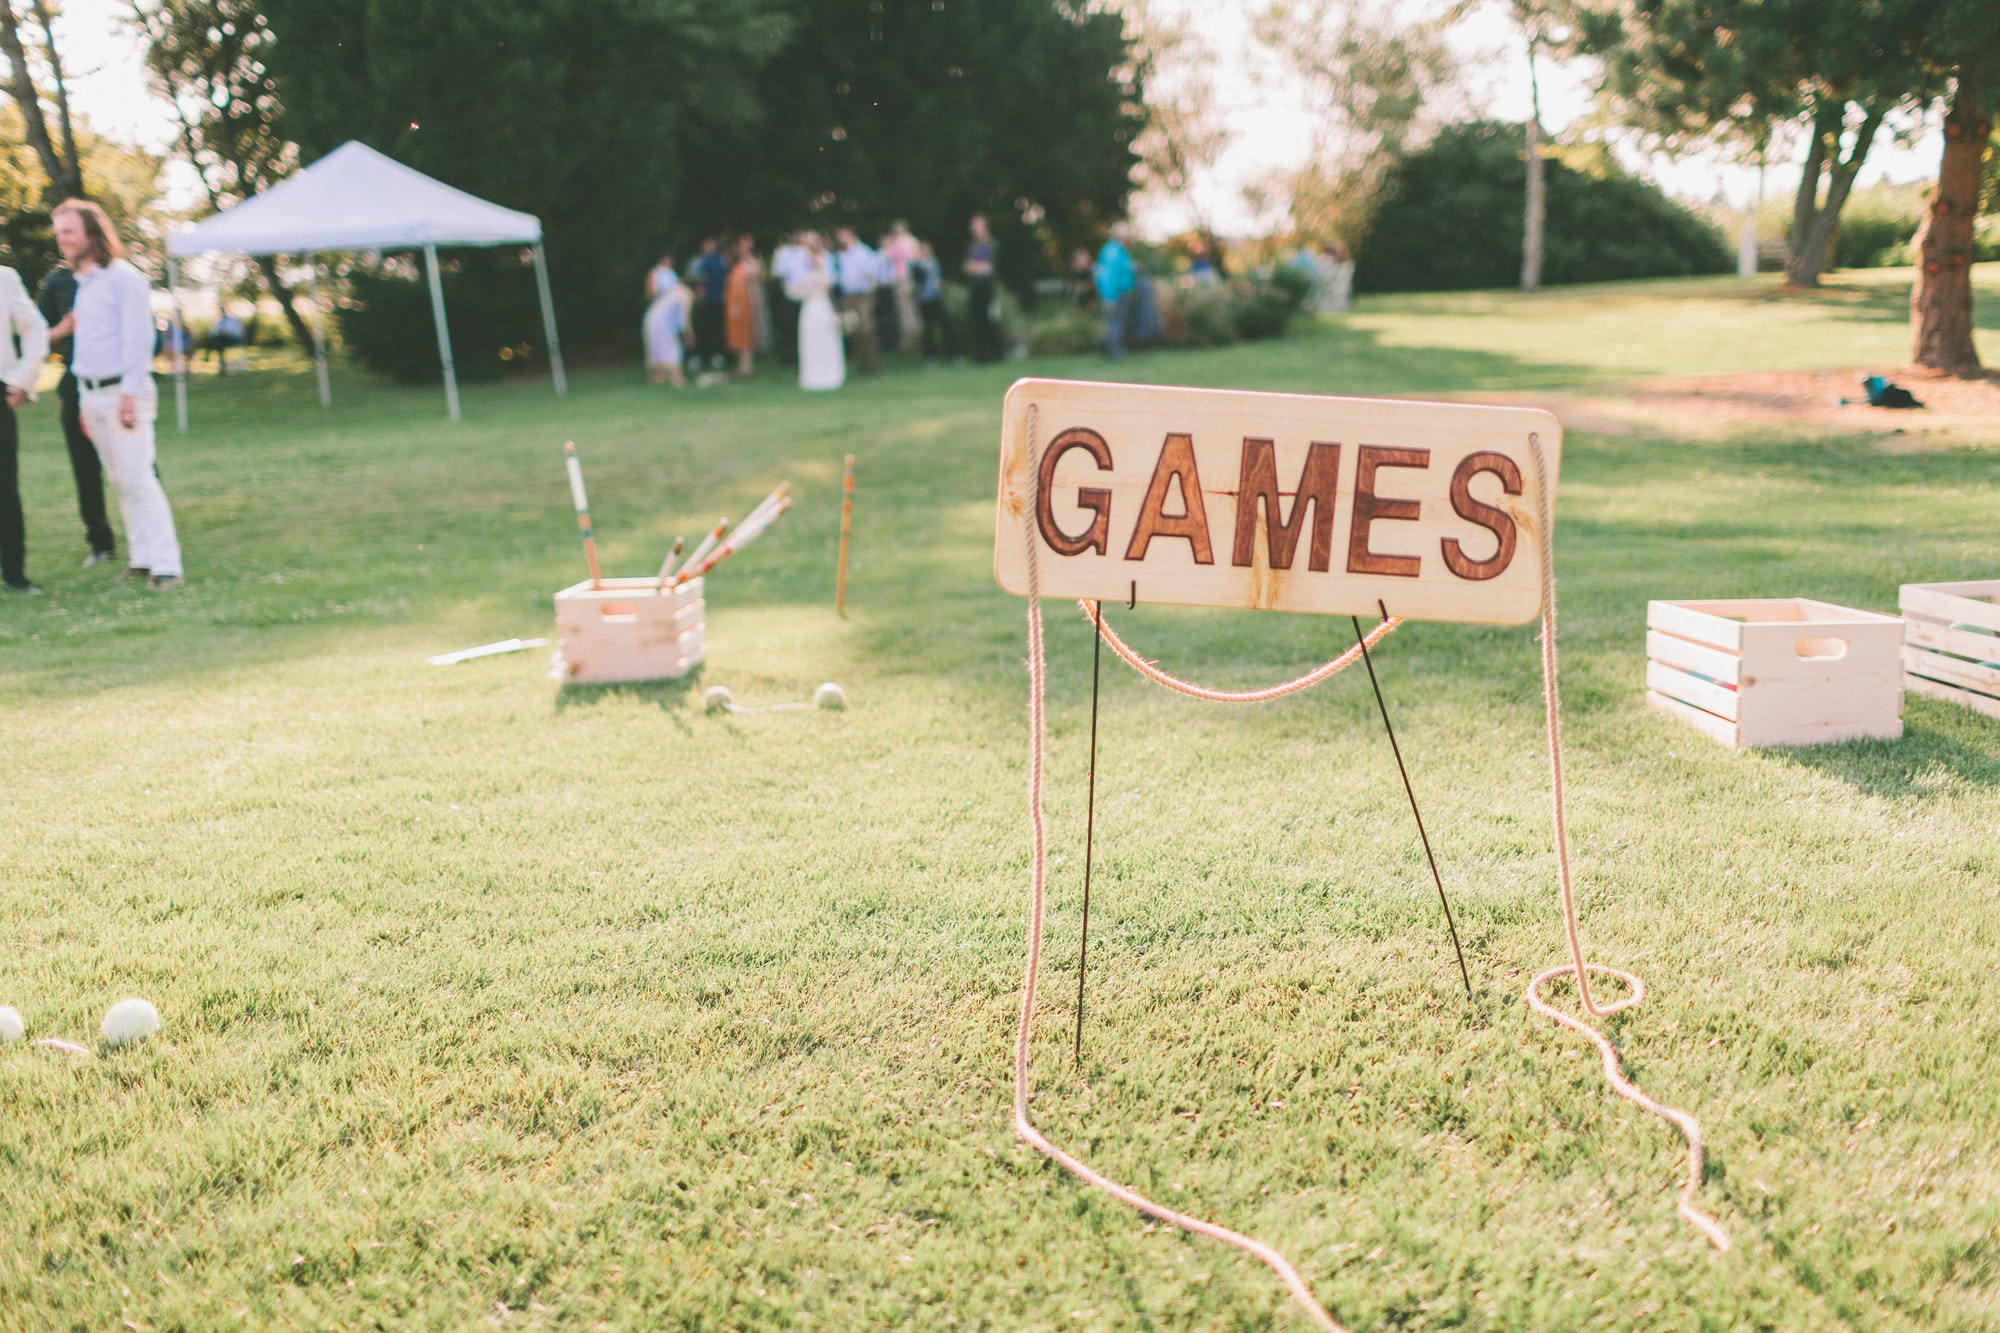 A sign that says ‘games’ set up for lawn games at a wedding.